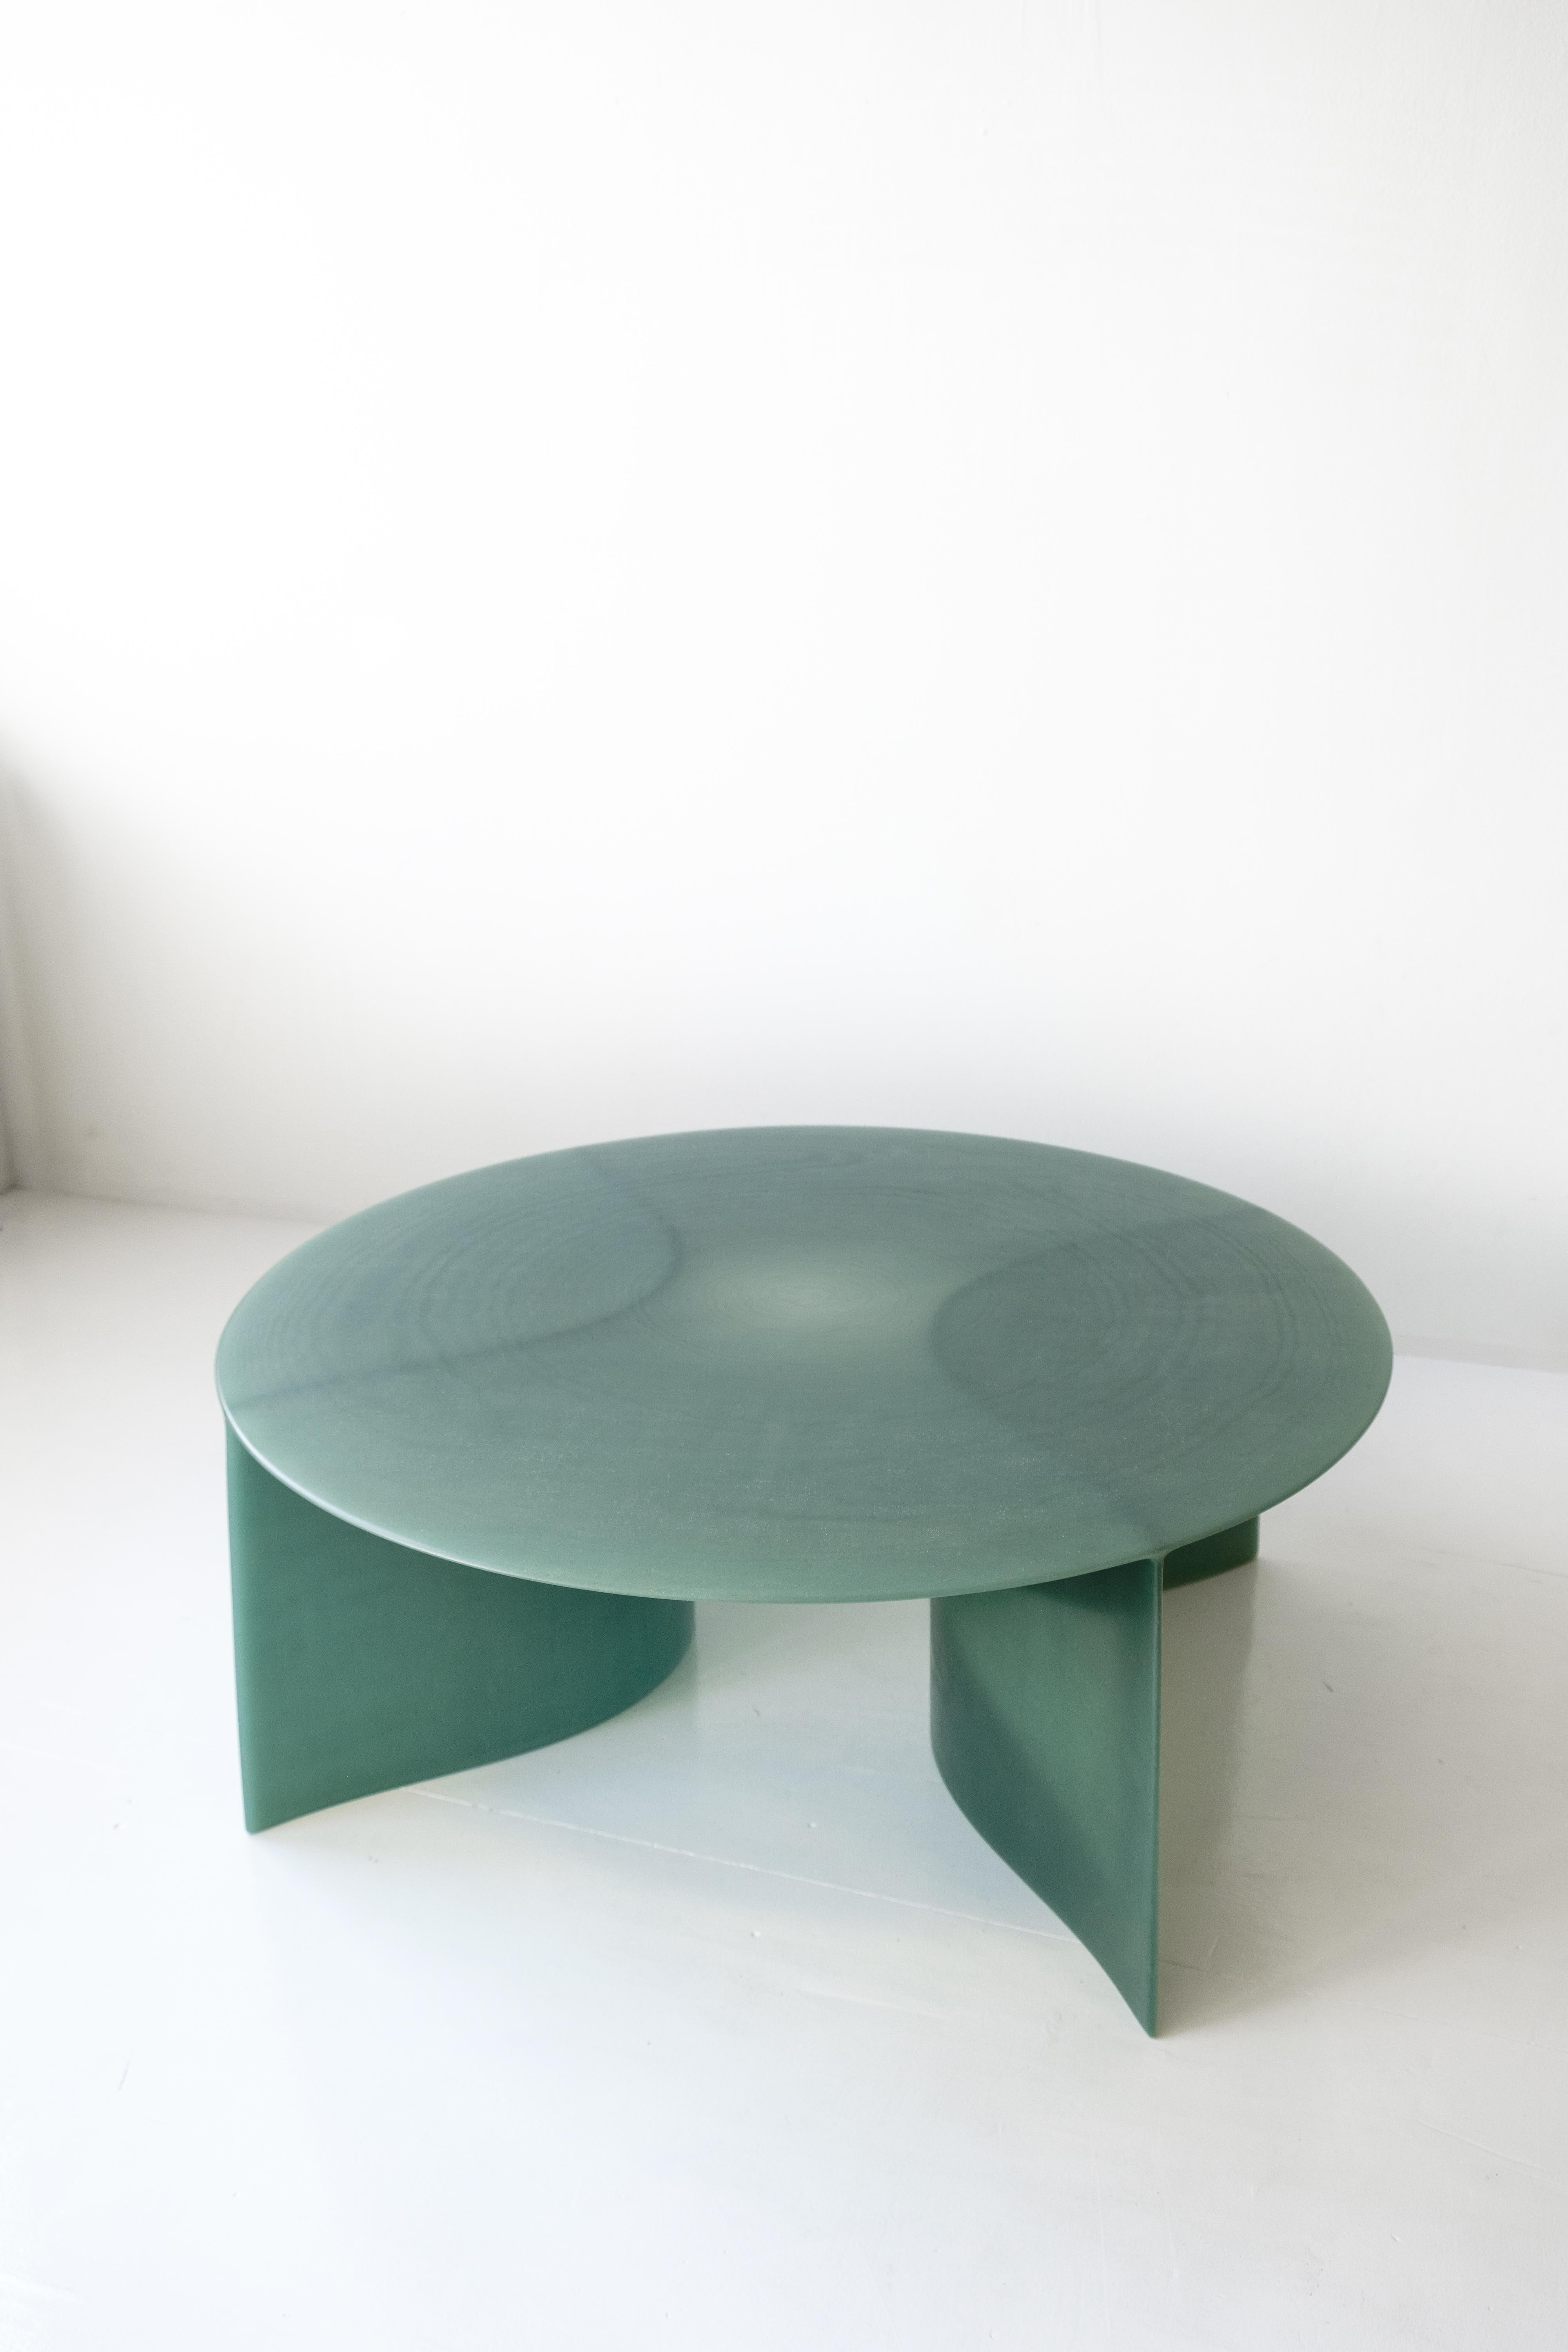 Contemporary Green Fiberglass, New Wave Coffee Table Round 120cm, by Lukas Cober 3